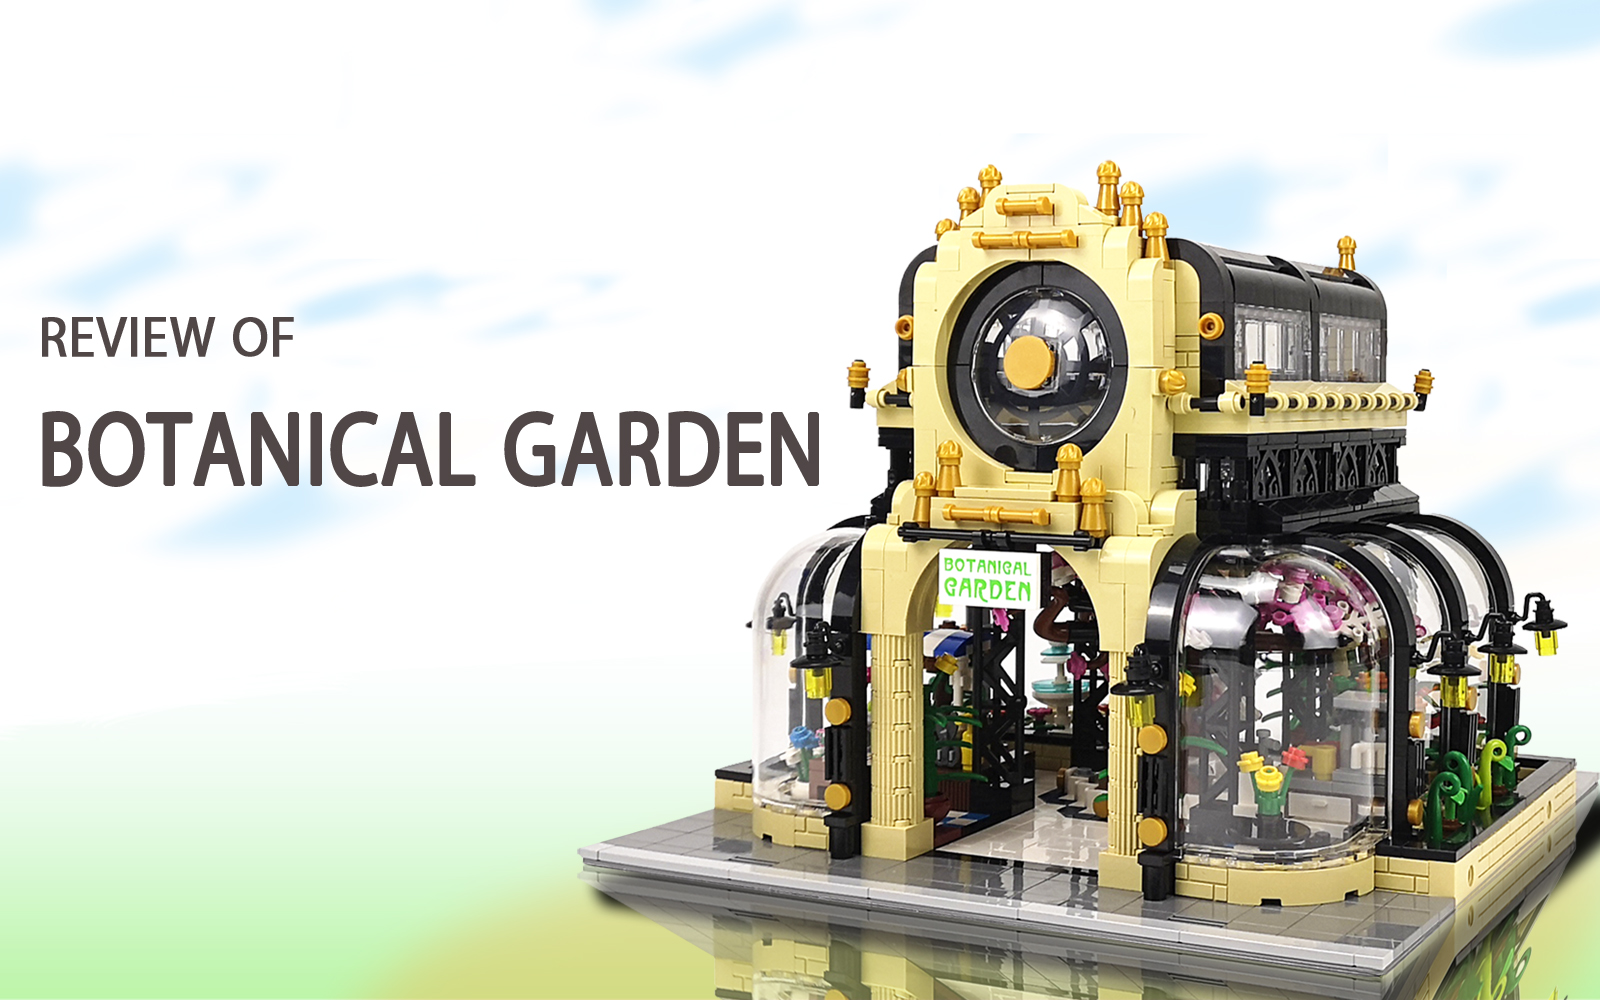 LEGO City update - MouldKing CHANEL Crystal House - EPISODE 15 